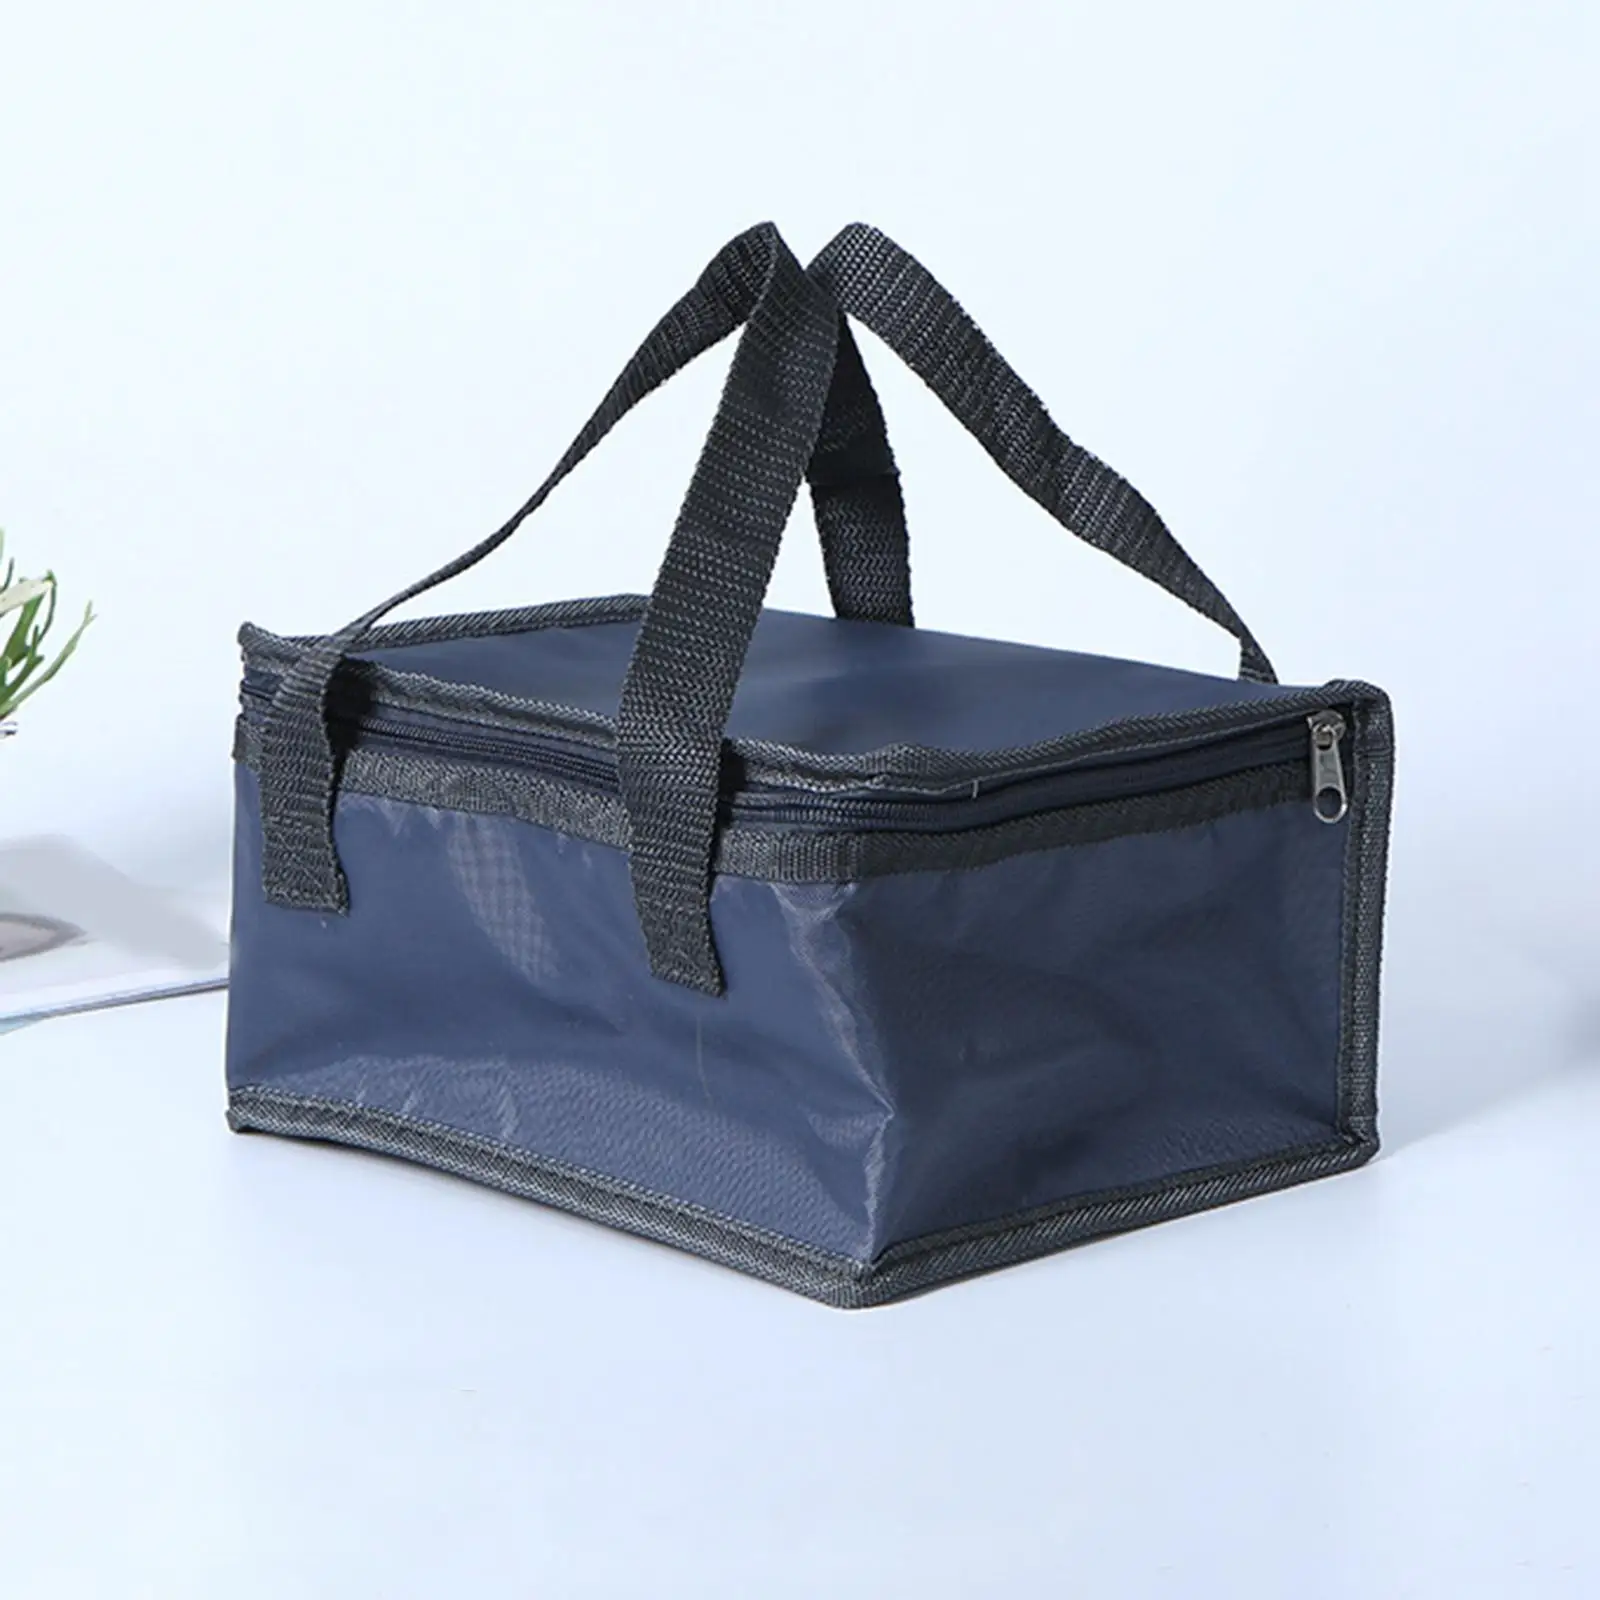 Reusable Insulated Grocery Bags Cold Storage Bag Shopping Bag Food Delivery Bags for Office School Beach Outdoor Picnic Fishing